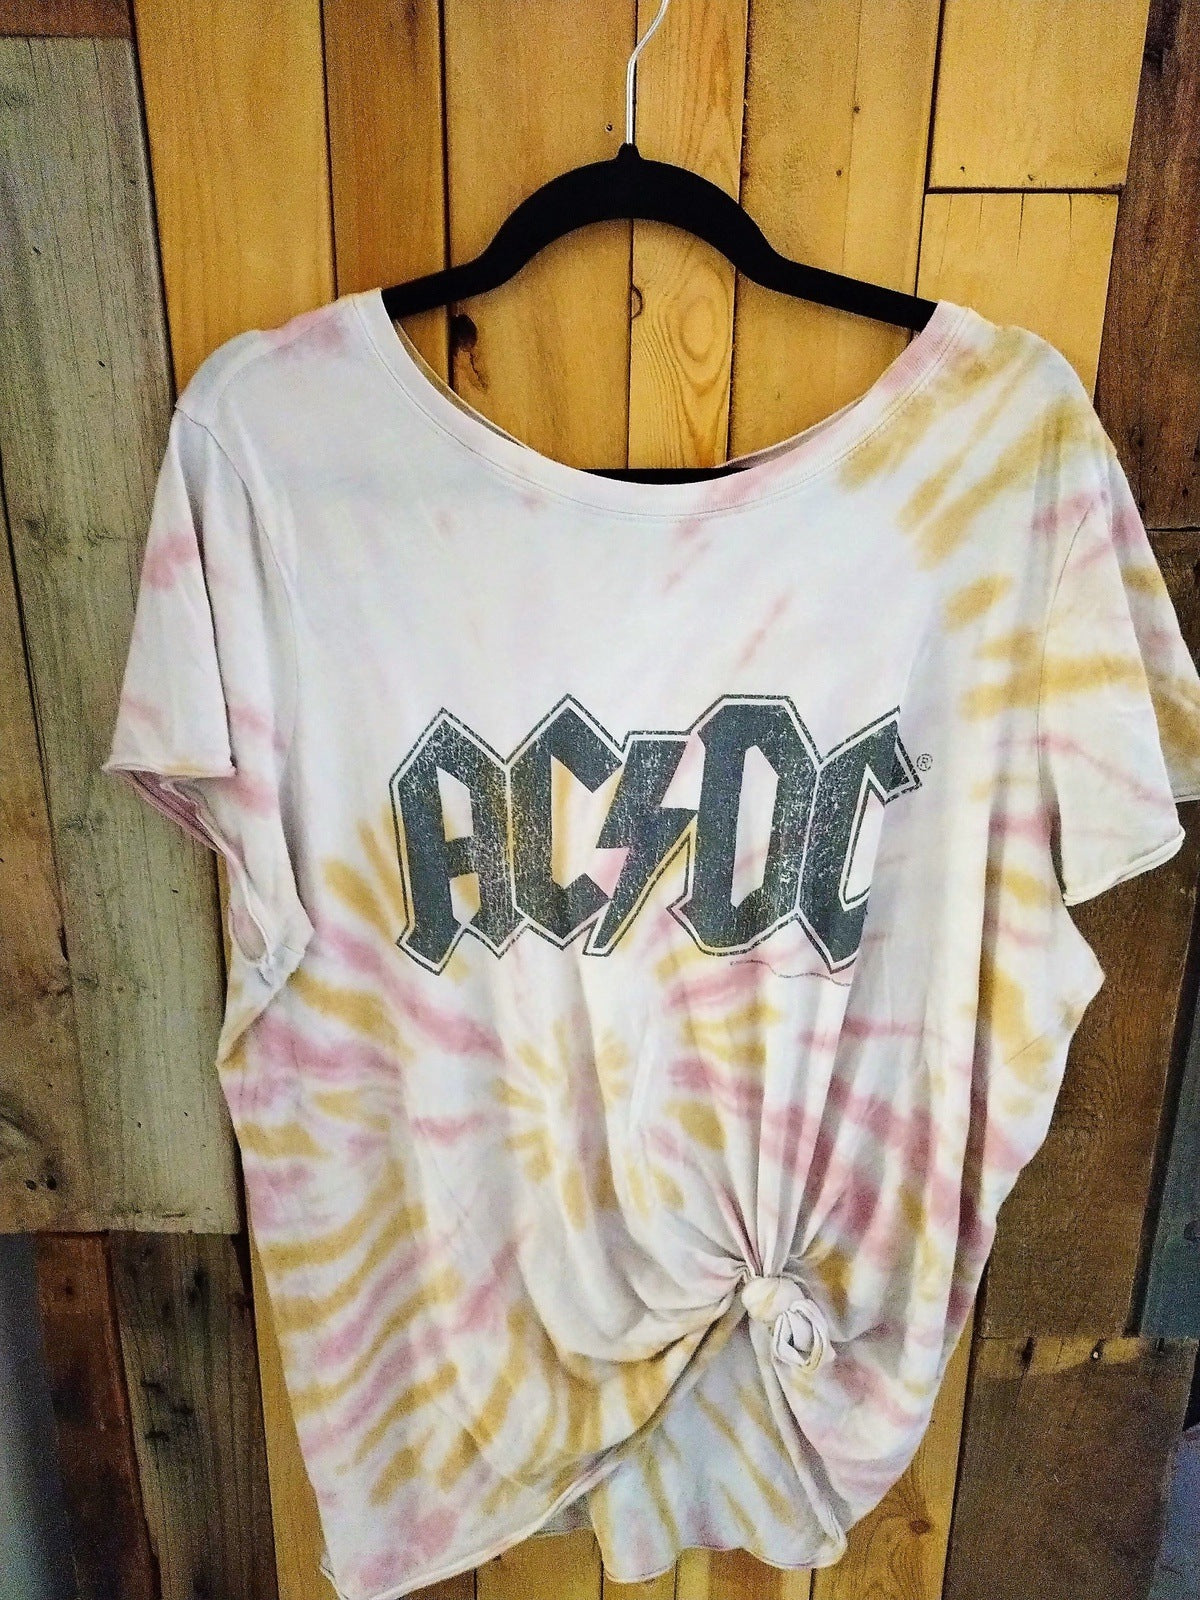 ACDC Women's T Shirt Size 2X